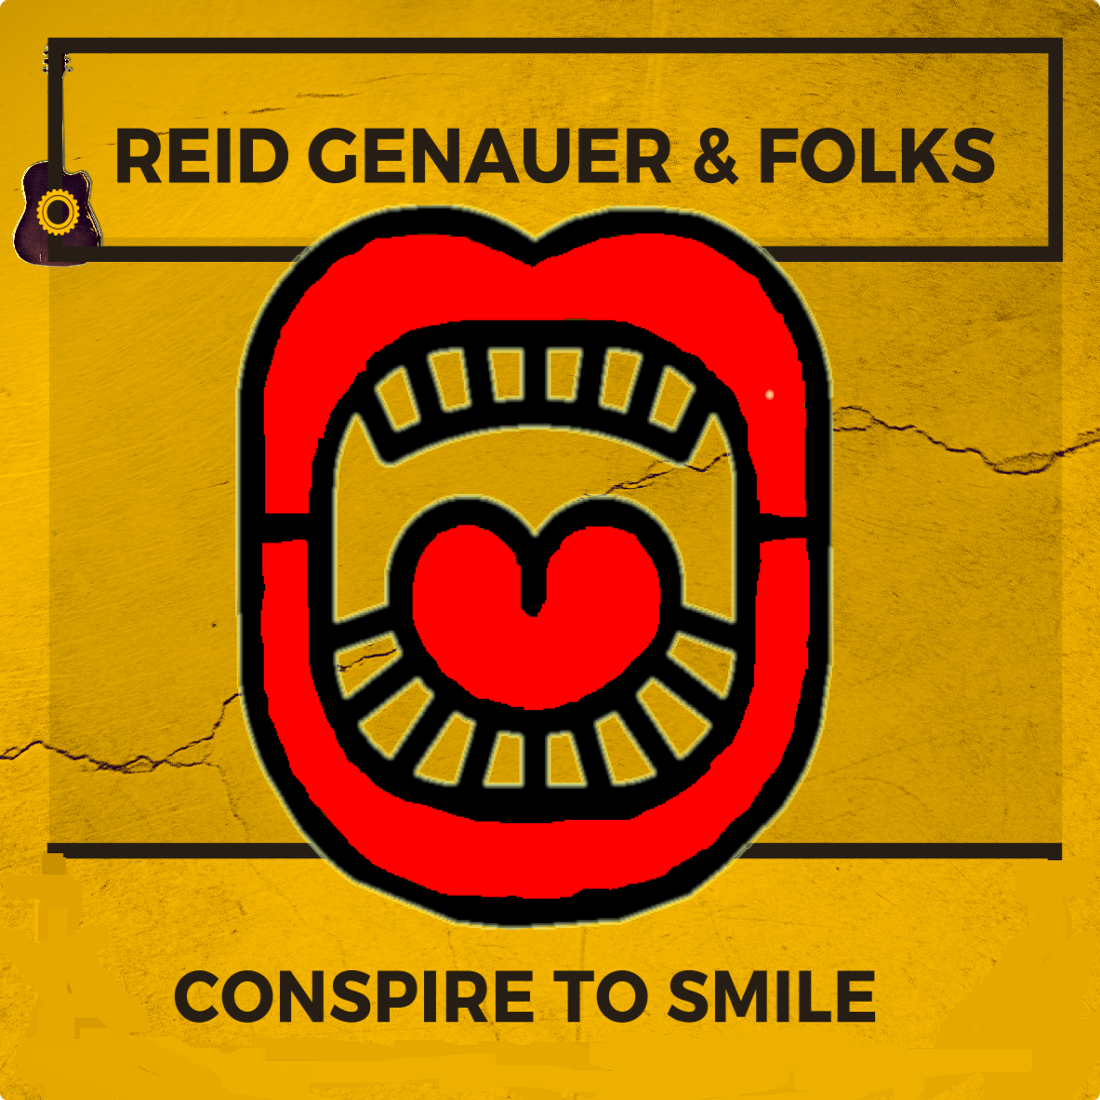 Reid Genauer & Folks “Conspire To Smile”. Announce upcoming album, social media thought experiment and Kickstarter beginning Feb 1 2018 